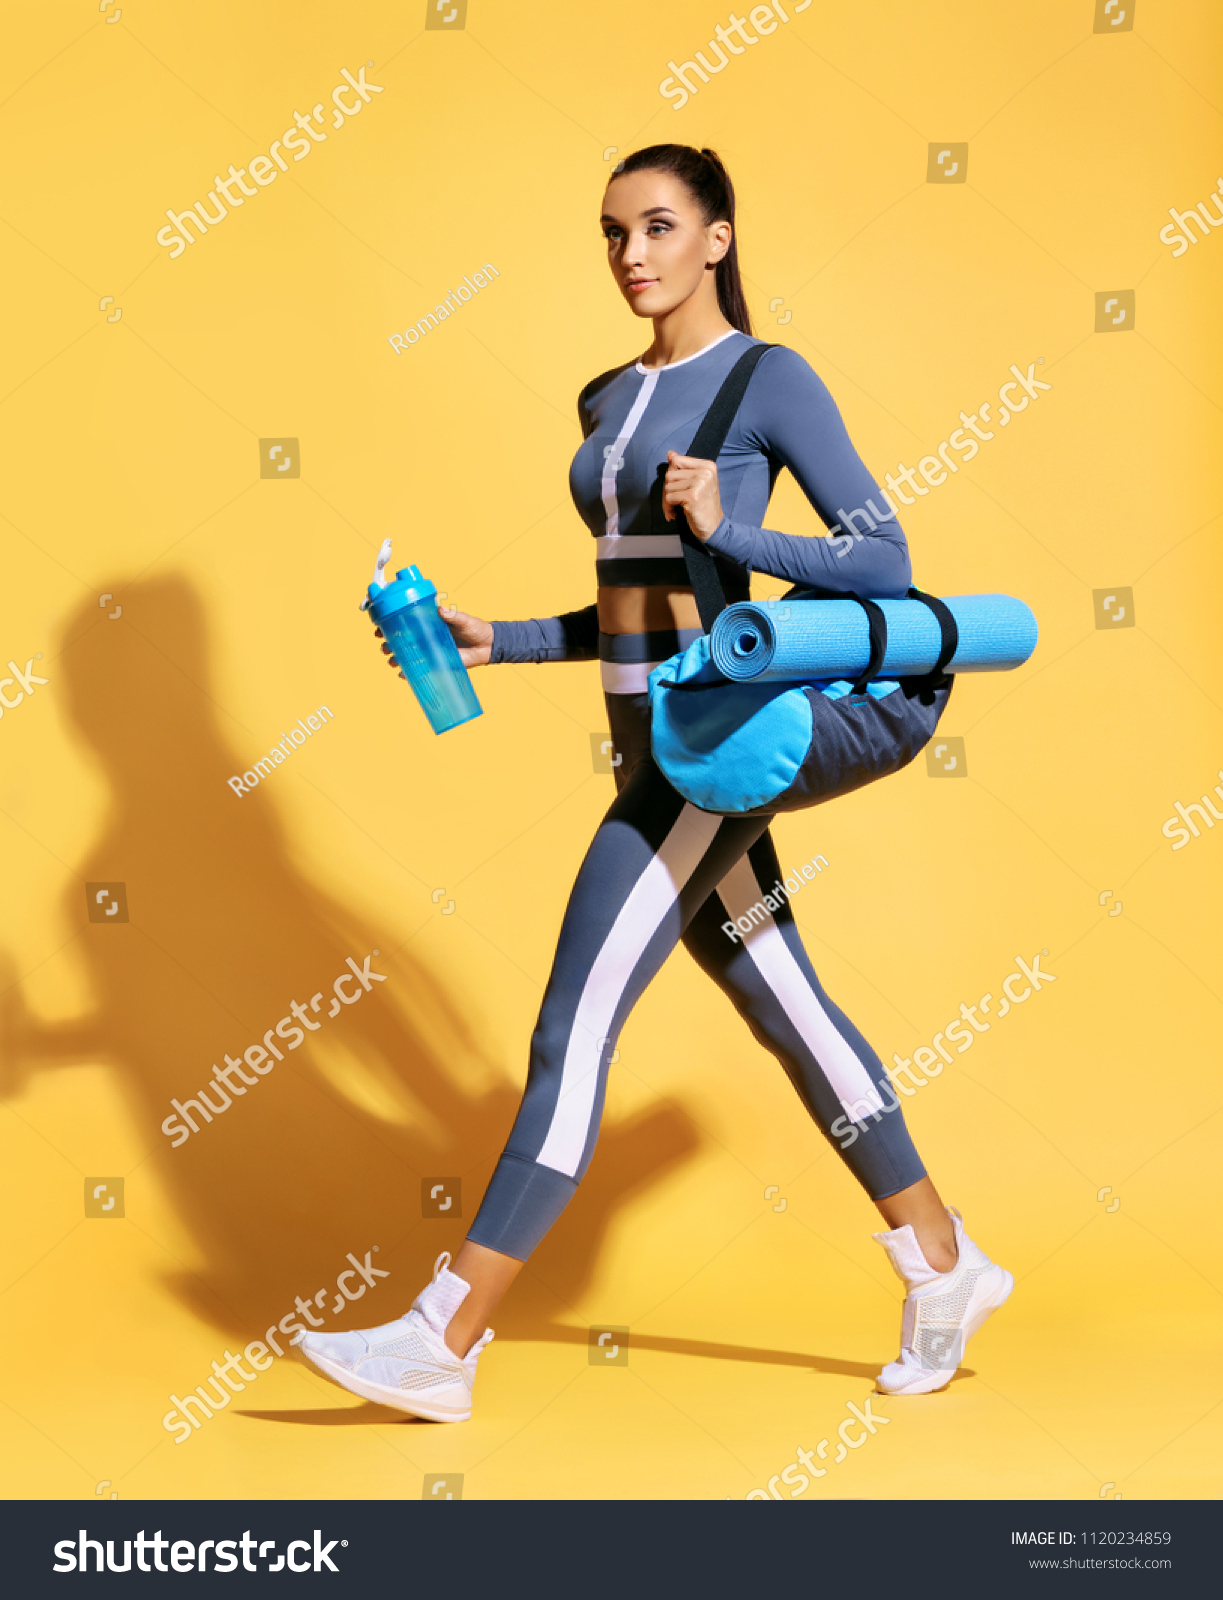 Go to gym! Attractive latin woman in fashionable sportswear on yellow background. Dynamic movement. Side view. Sports and healthy lifestyle #1120234859